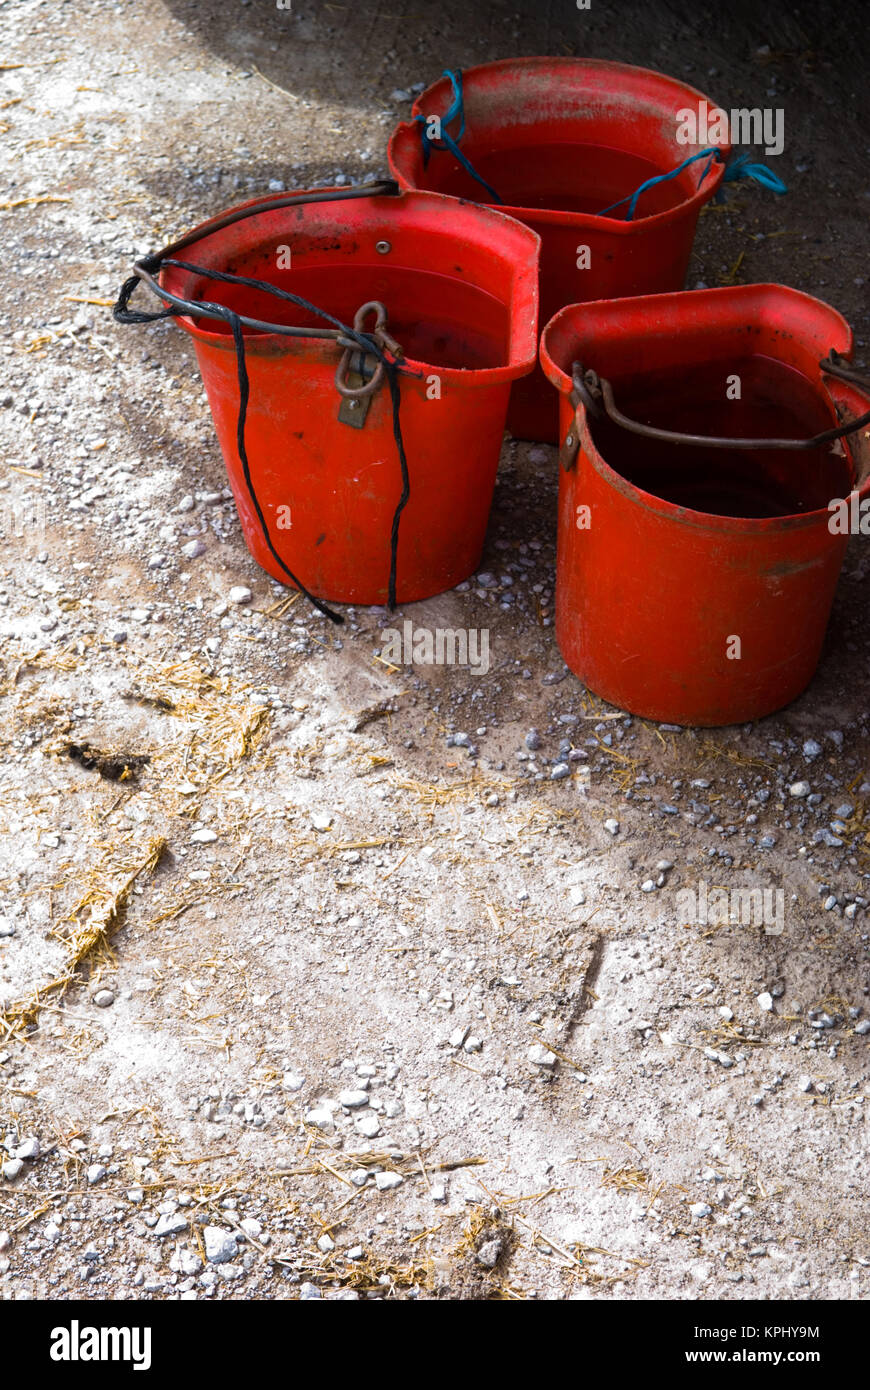 three red buckets filled with water destined for various circus animals Stock Photo